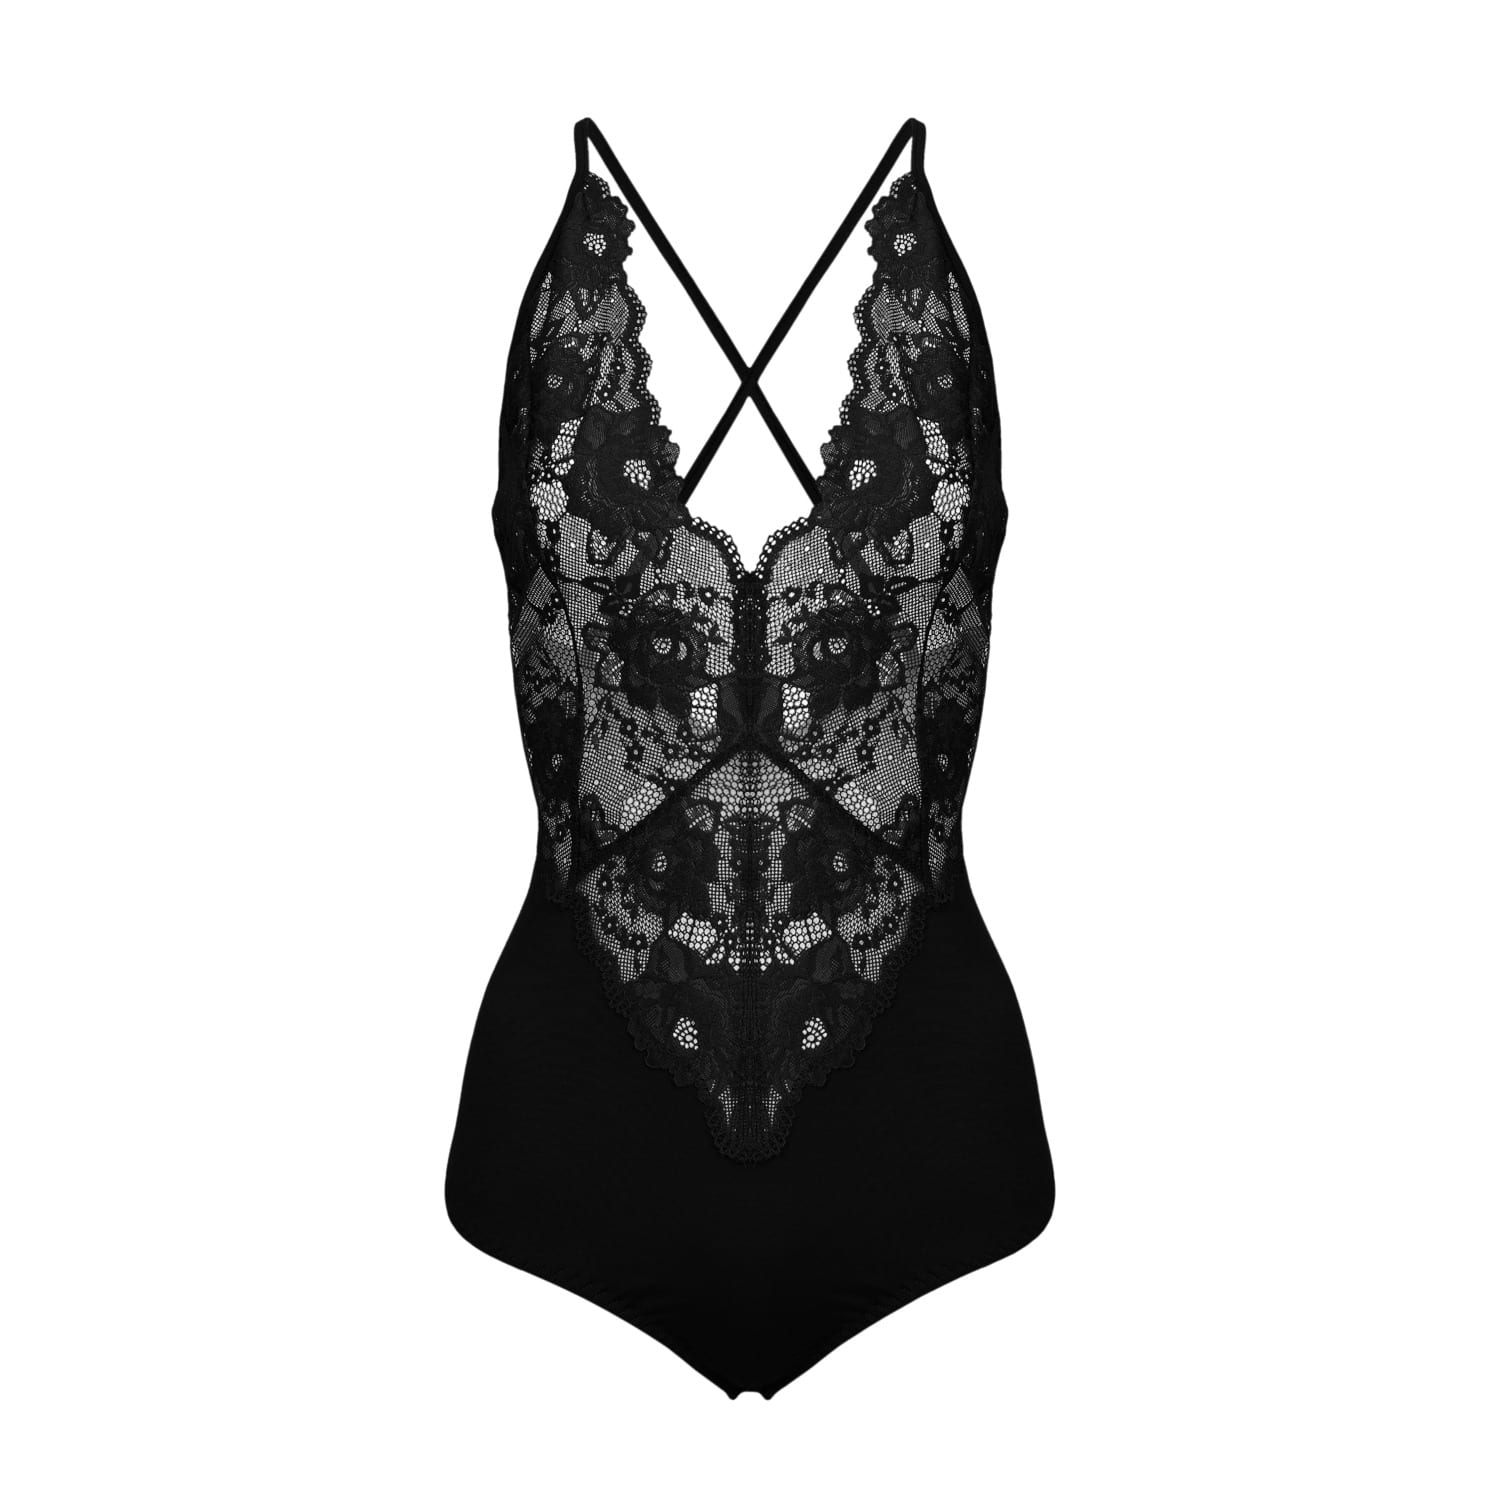 Lace Intimate Bodysuit - Rose Gold, Oh!Zuza night&day